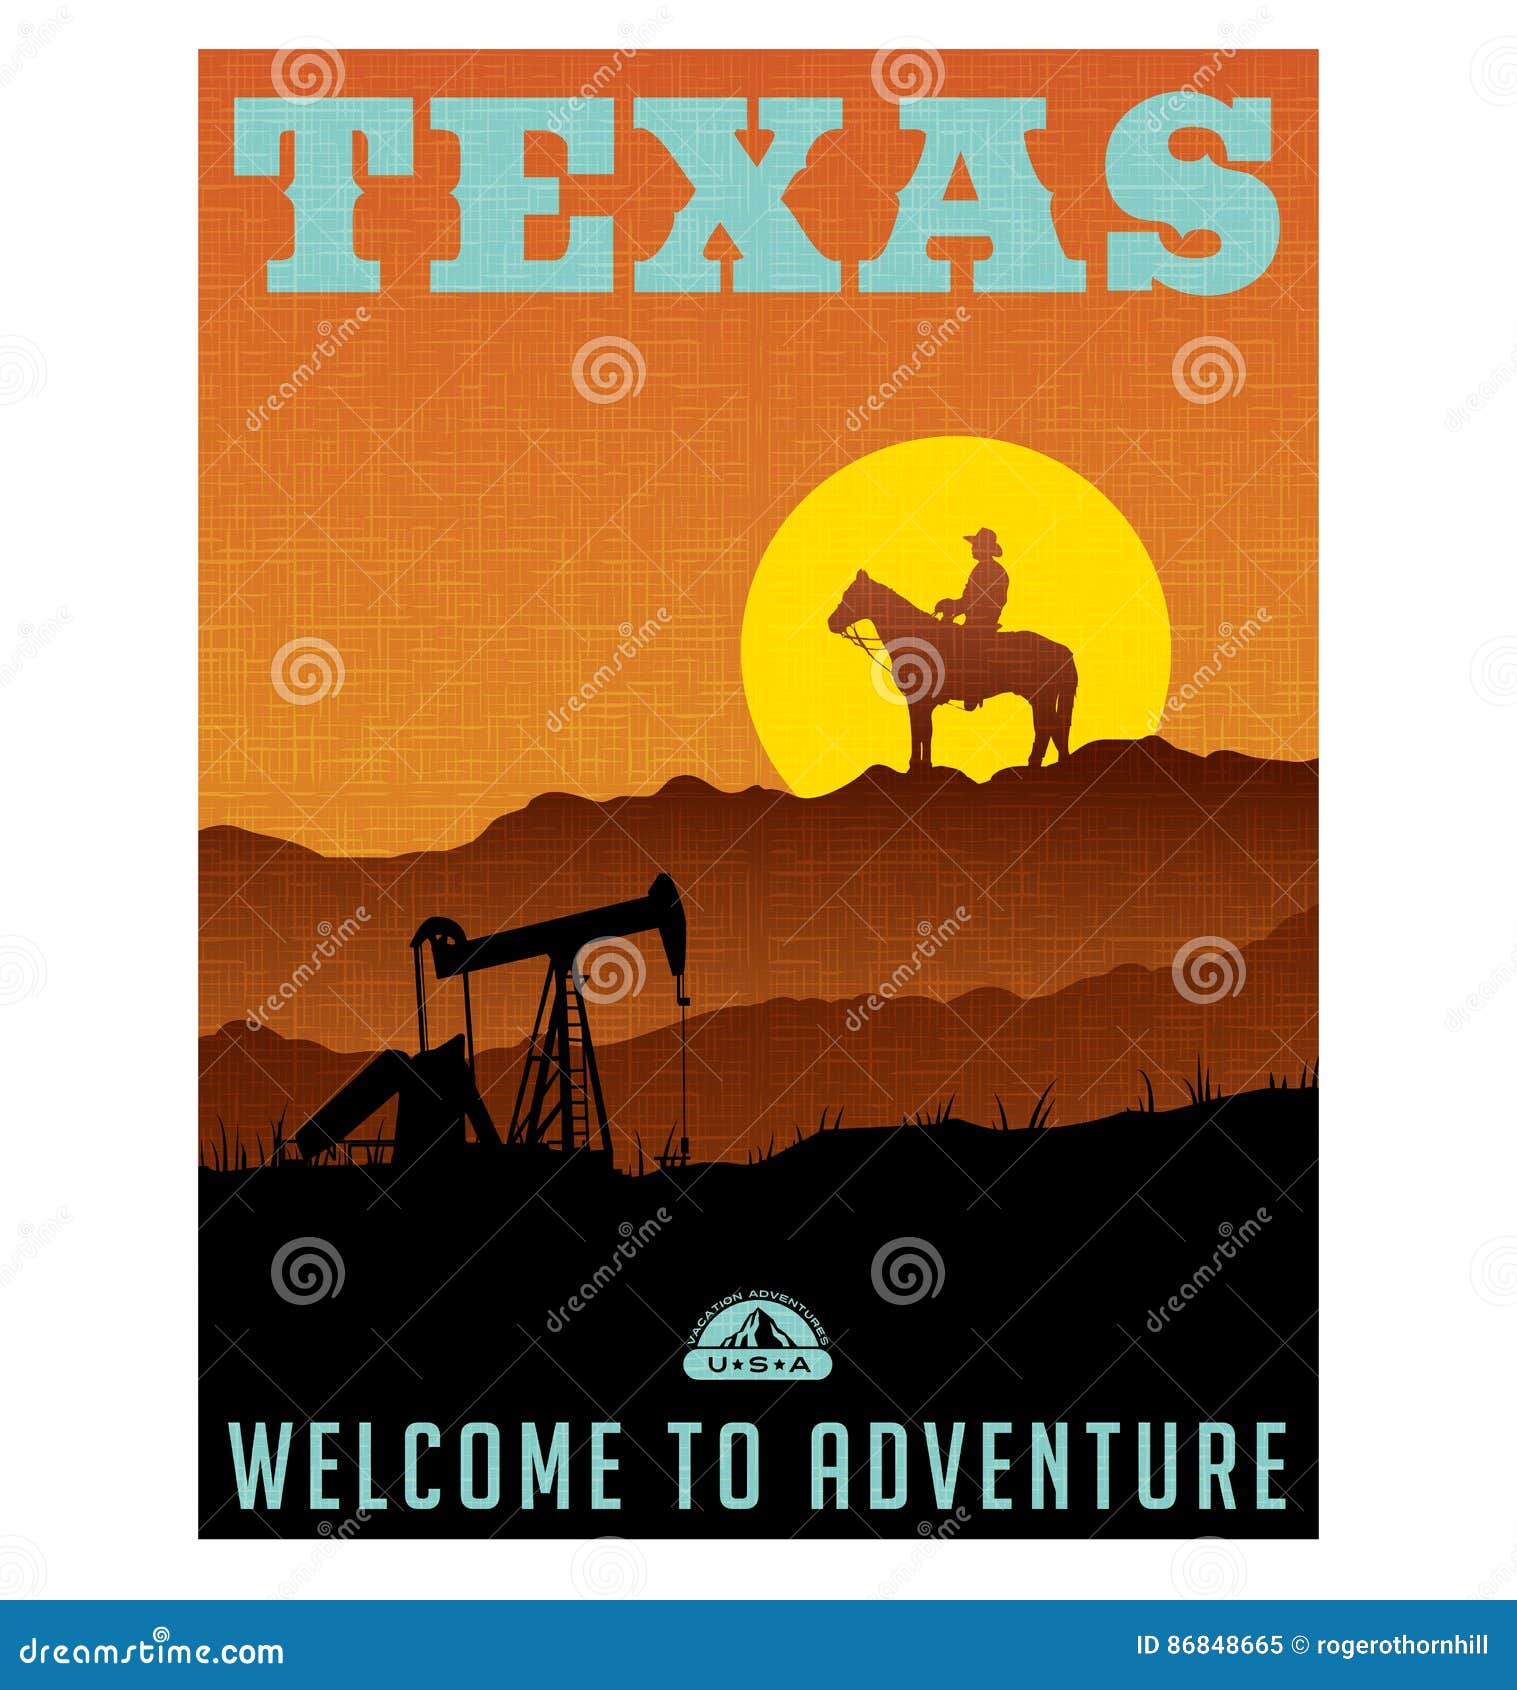 illustrated travel poster or sticker for texas, usa